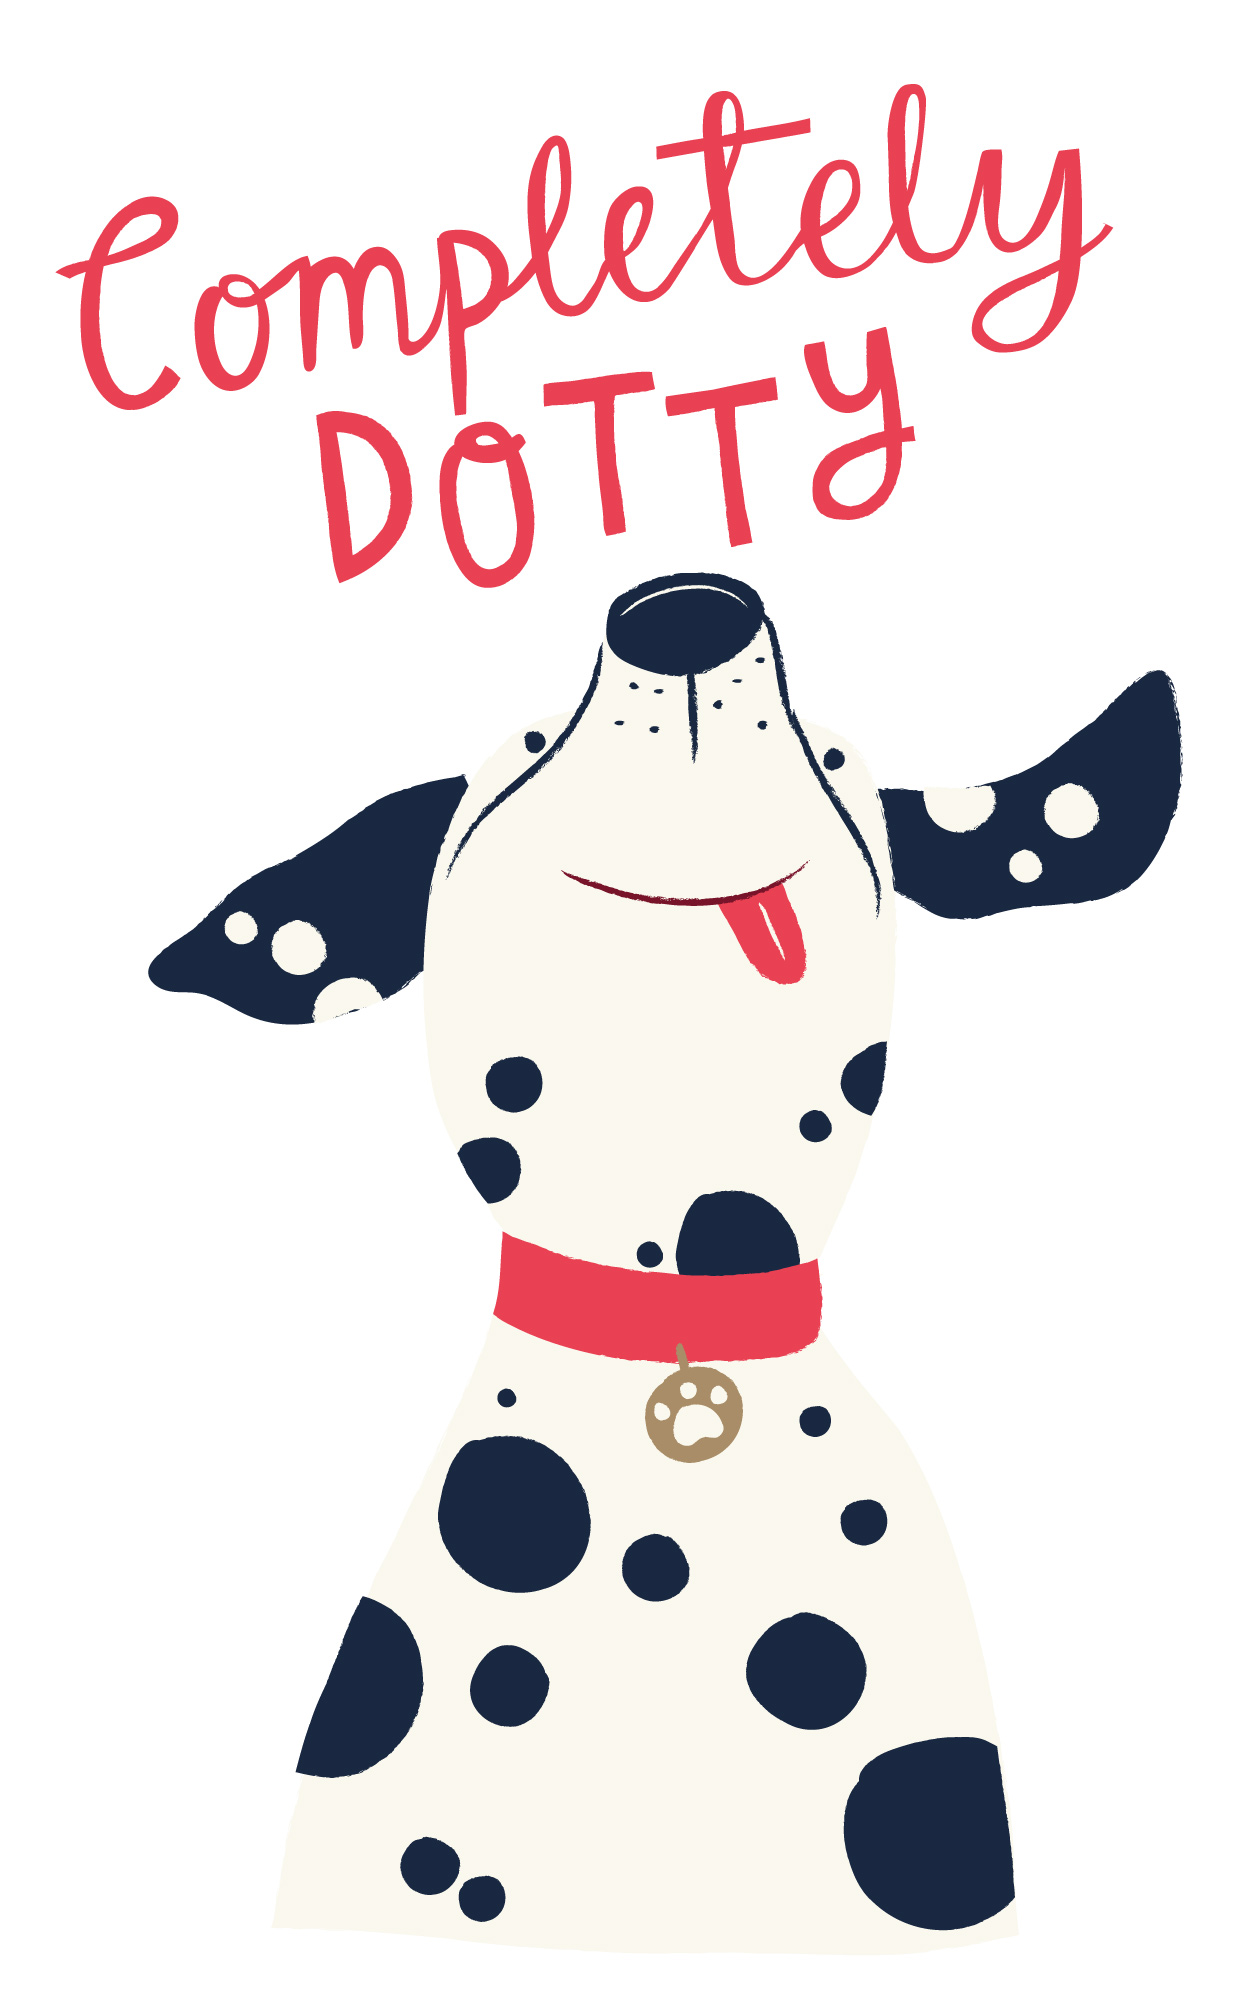 Completely Dotty Dalmatian print for Joules 